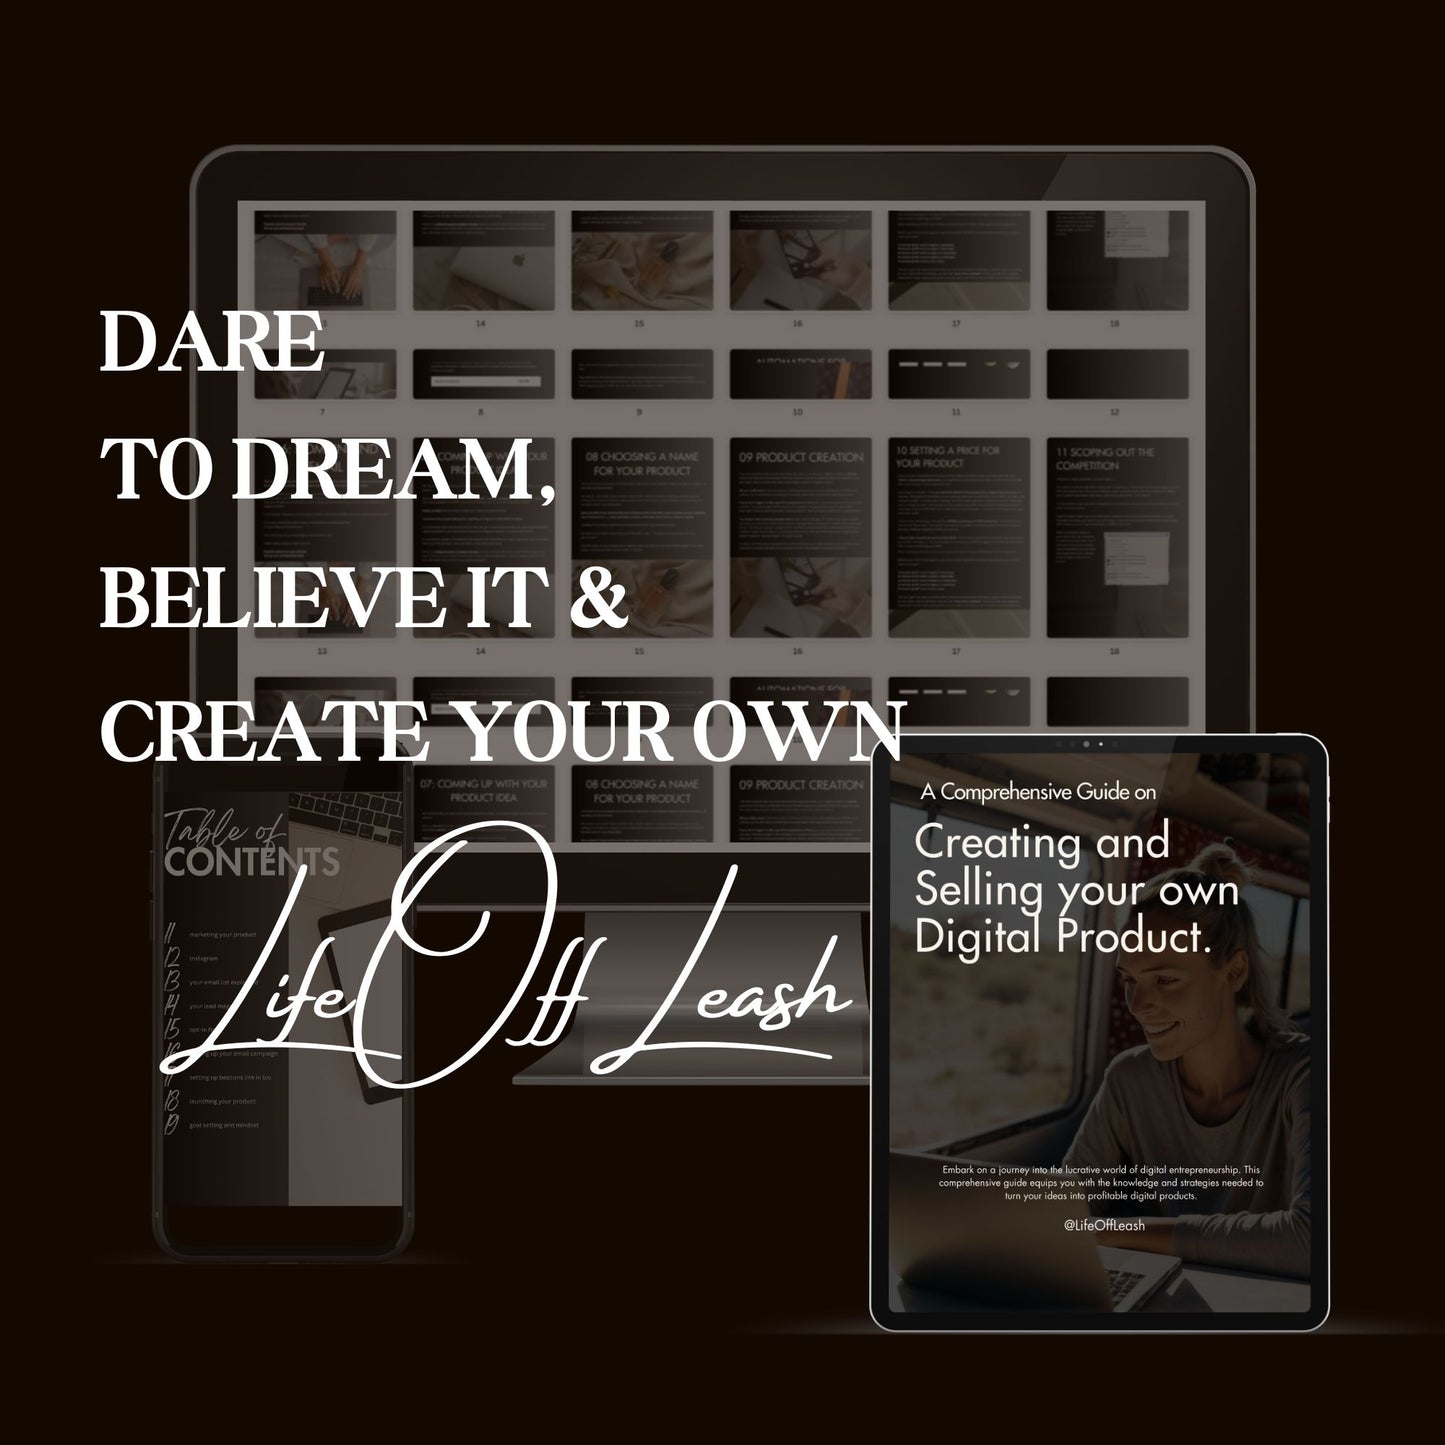 Creating & Selling Your Own Digital Products